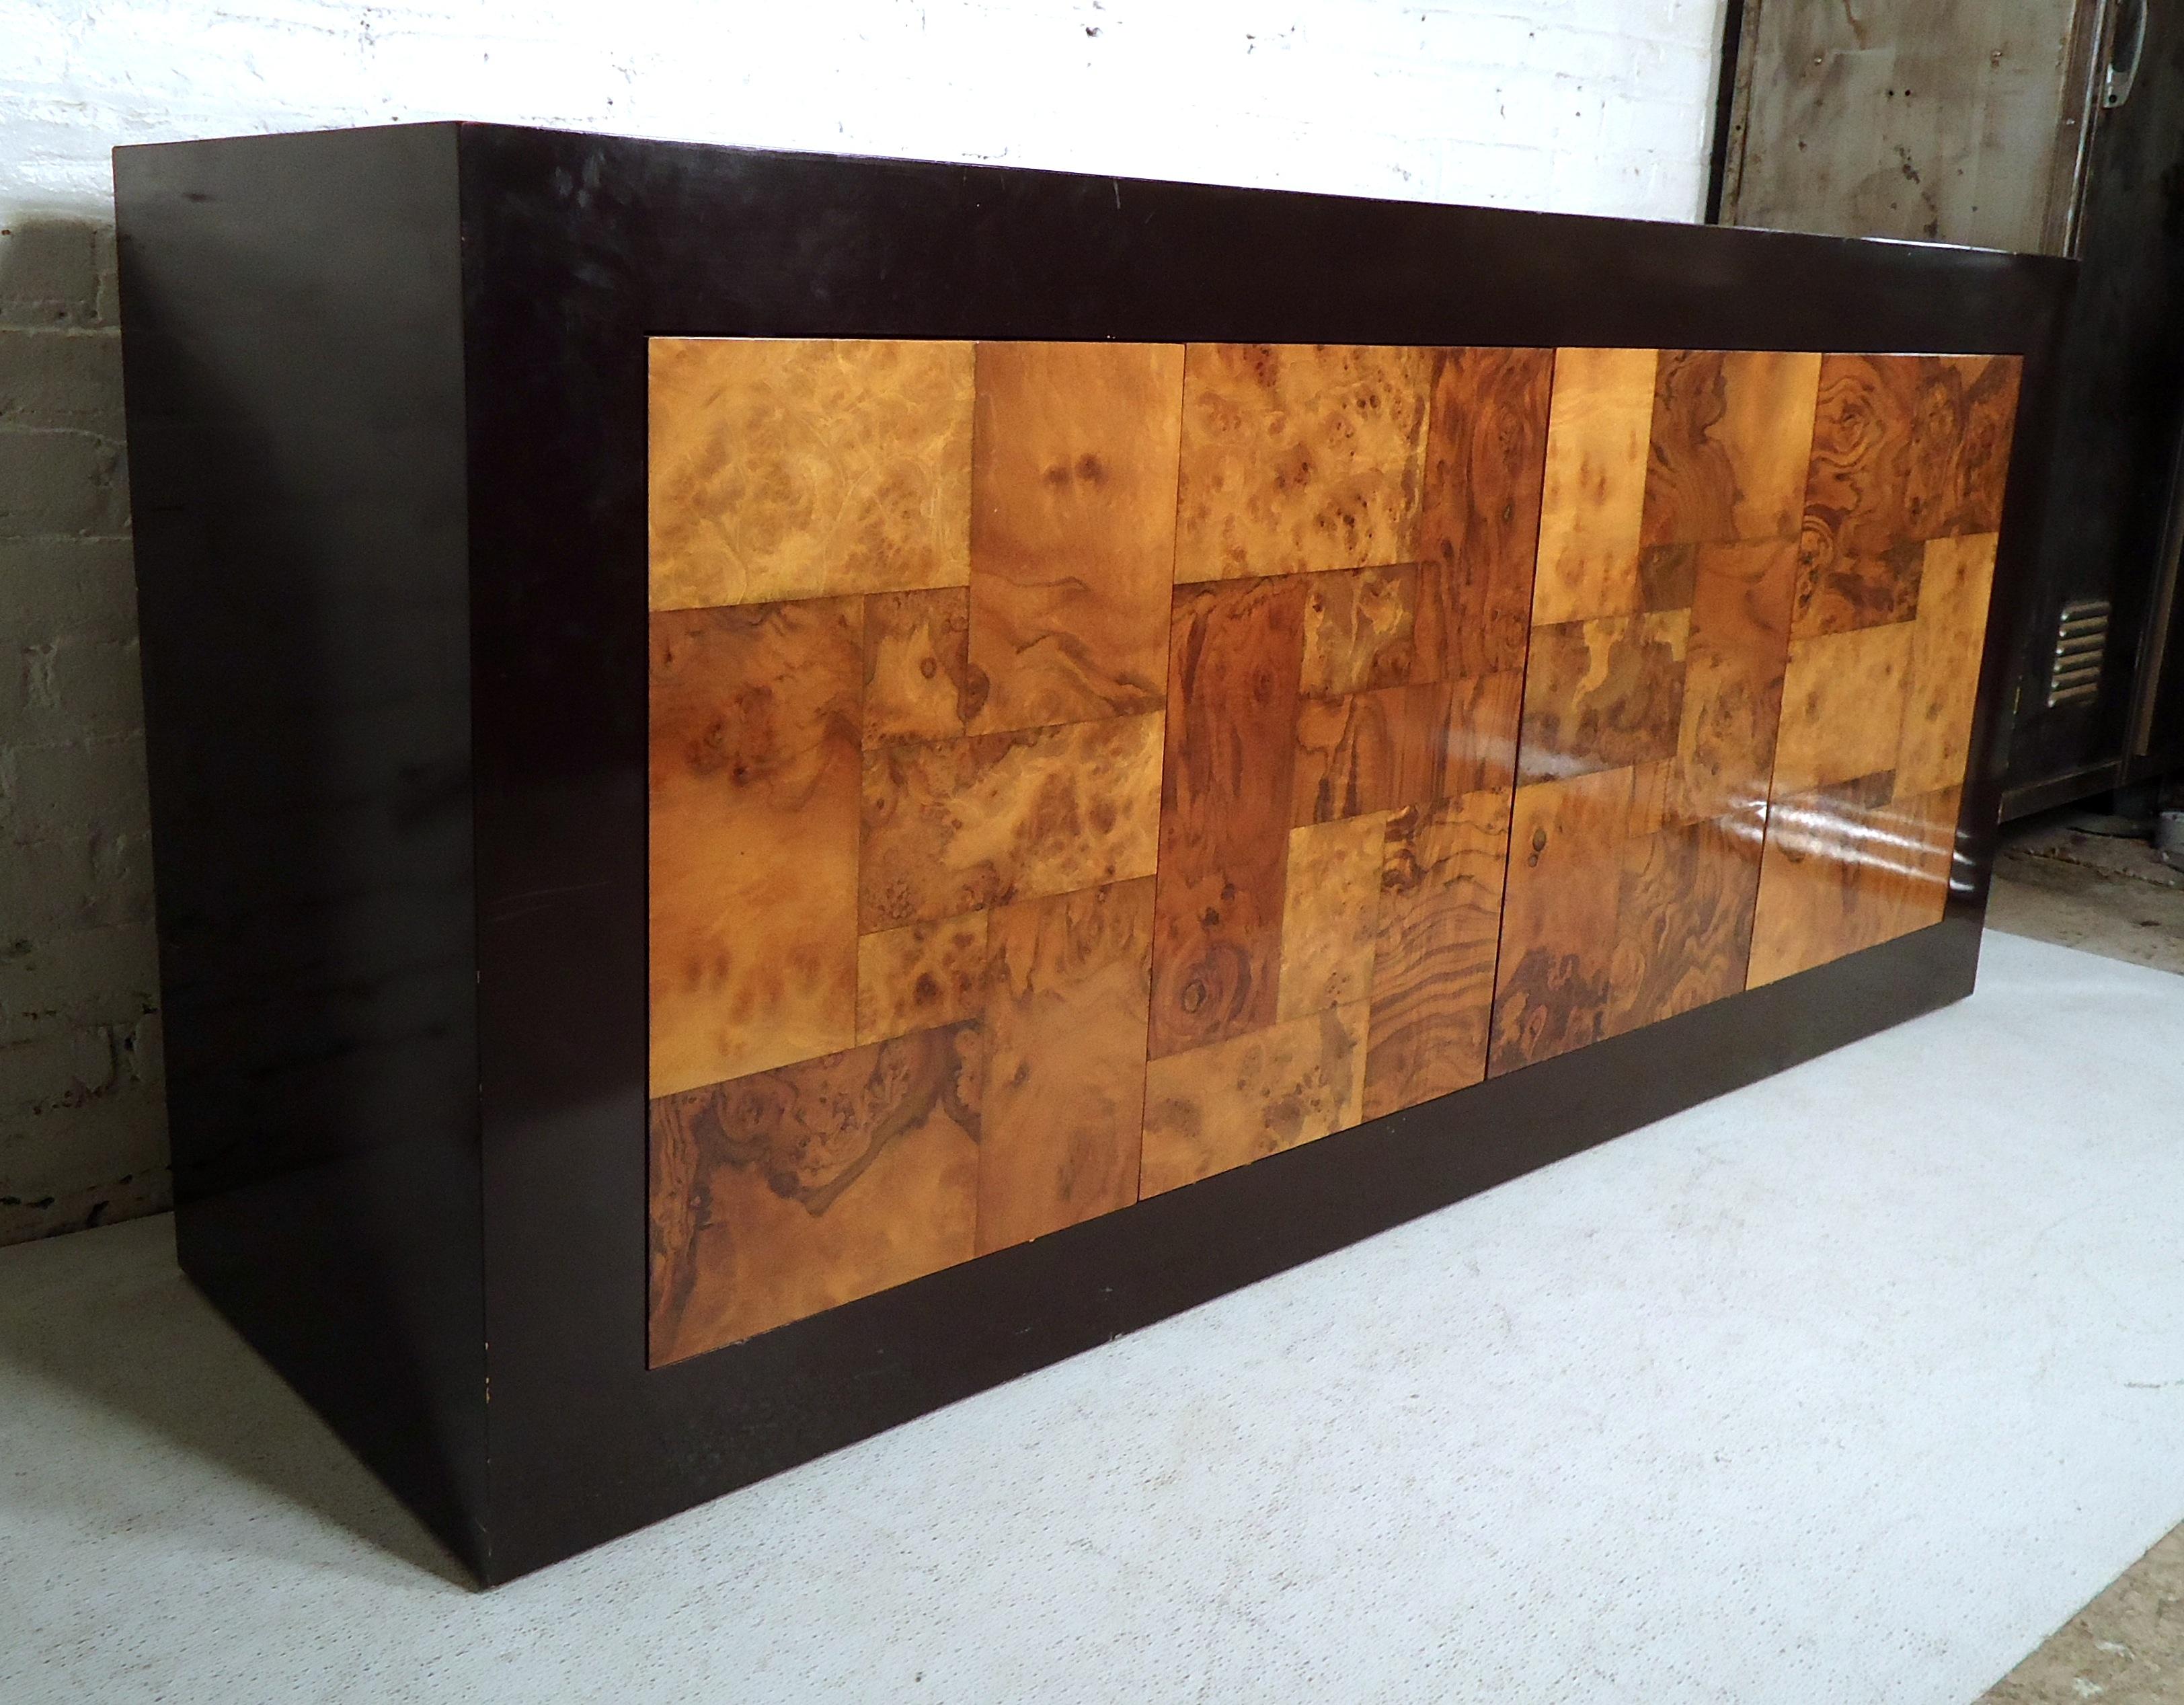 Sleek vintage modern credenza features spacious storage cabinets, small drawer, black lacquer body and burl wood doors. 

Please confirm item location (NY or NJ).